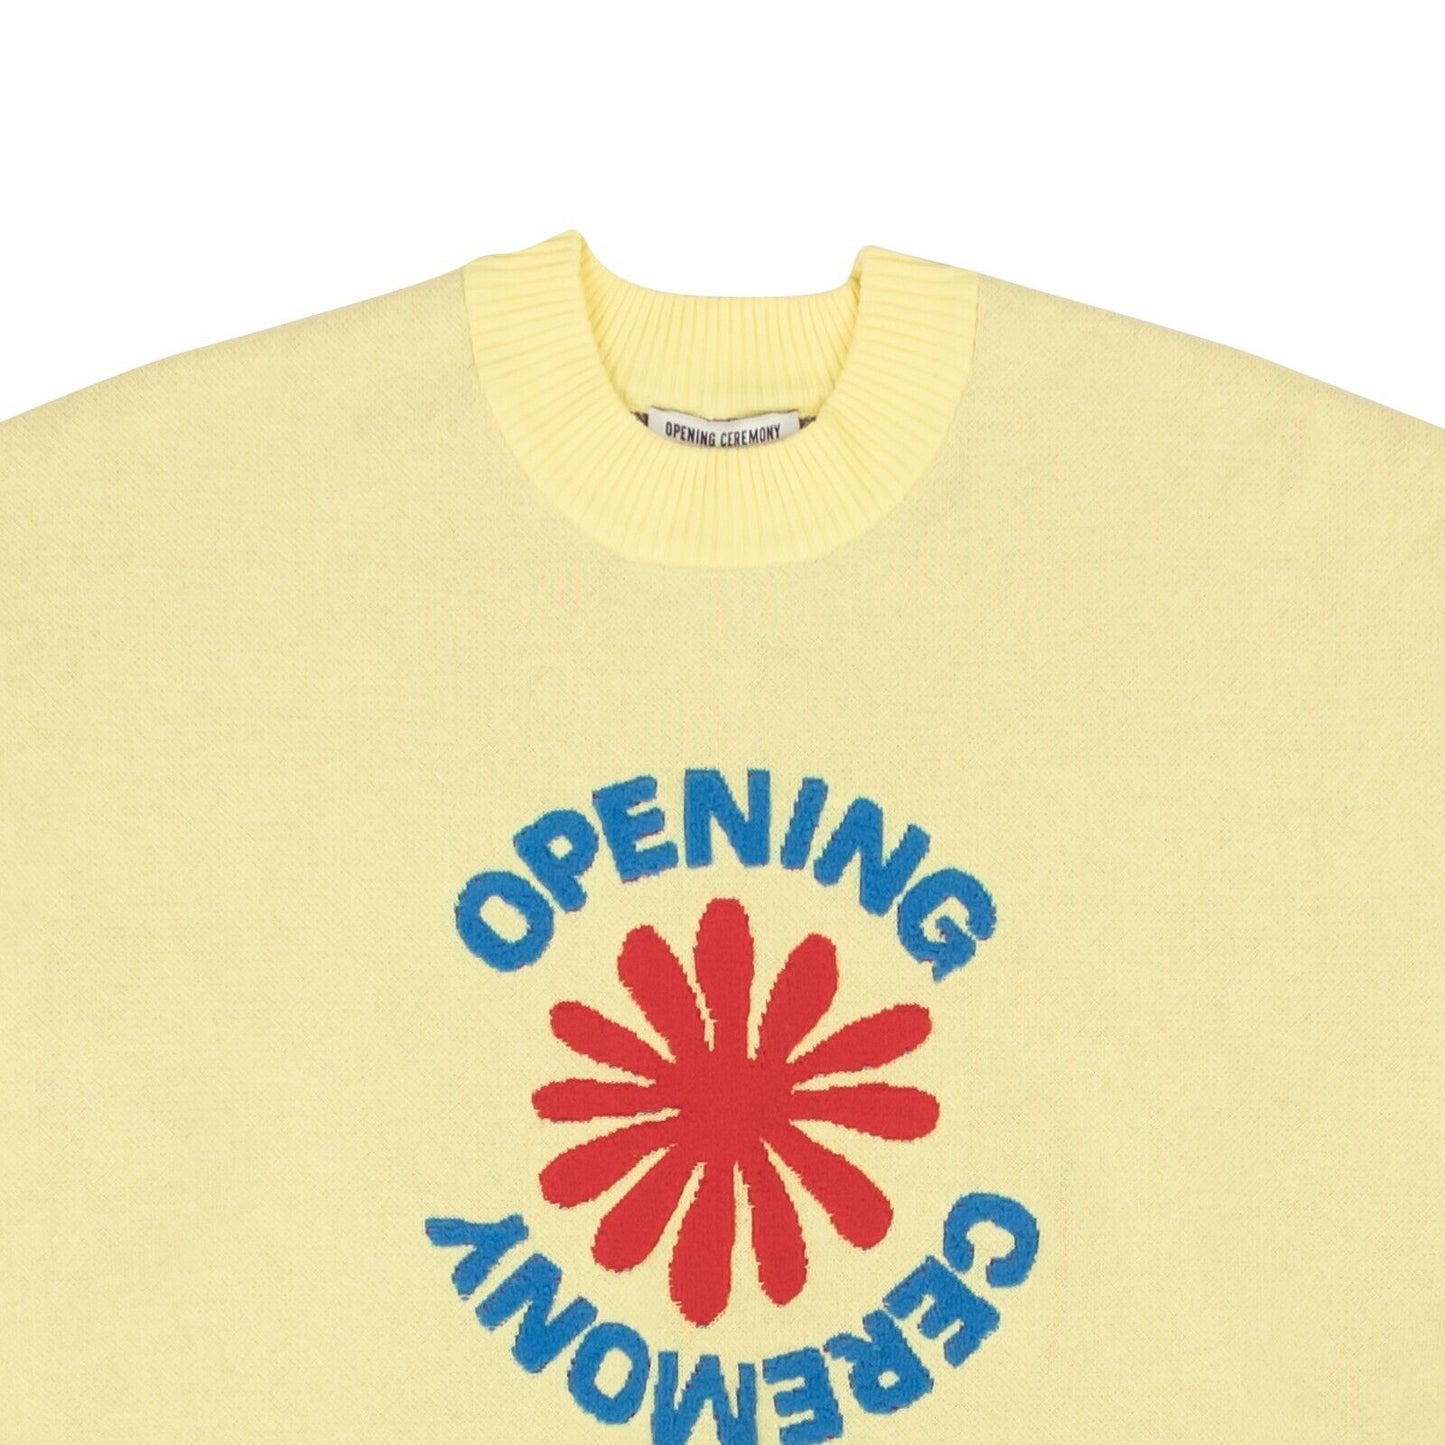 Opening Ceremony Cropped Oc Flower Logo Sweater - Yellow